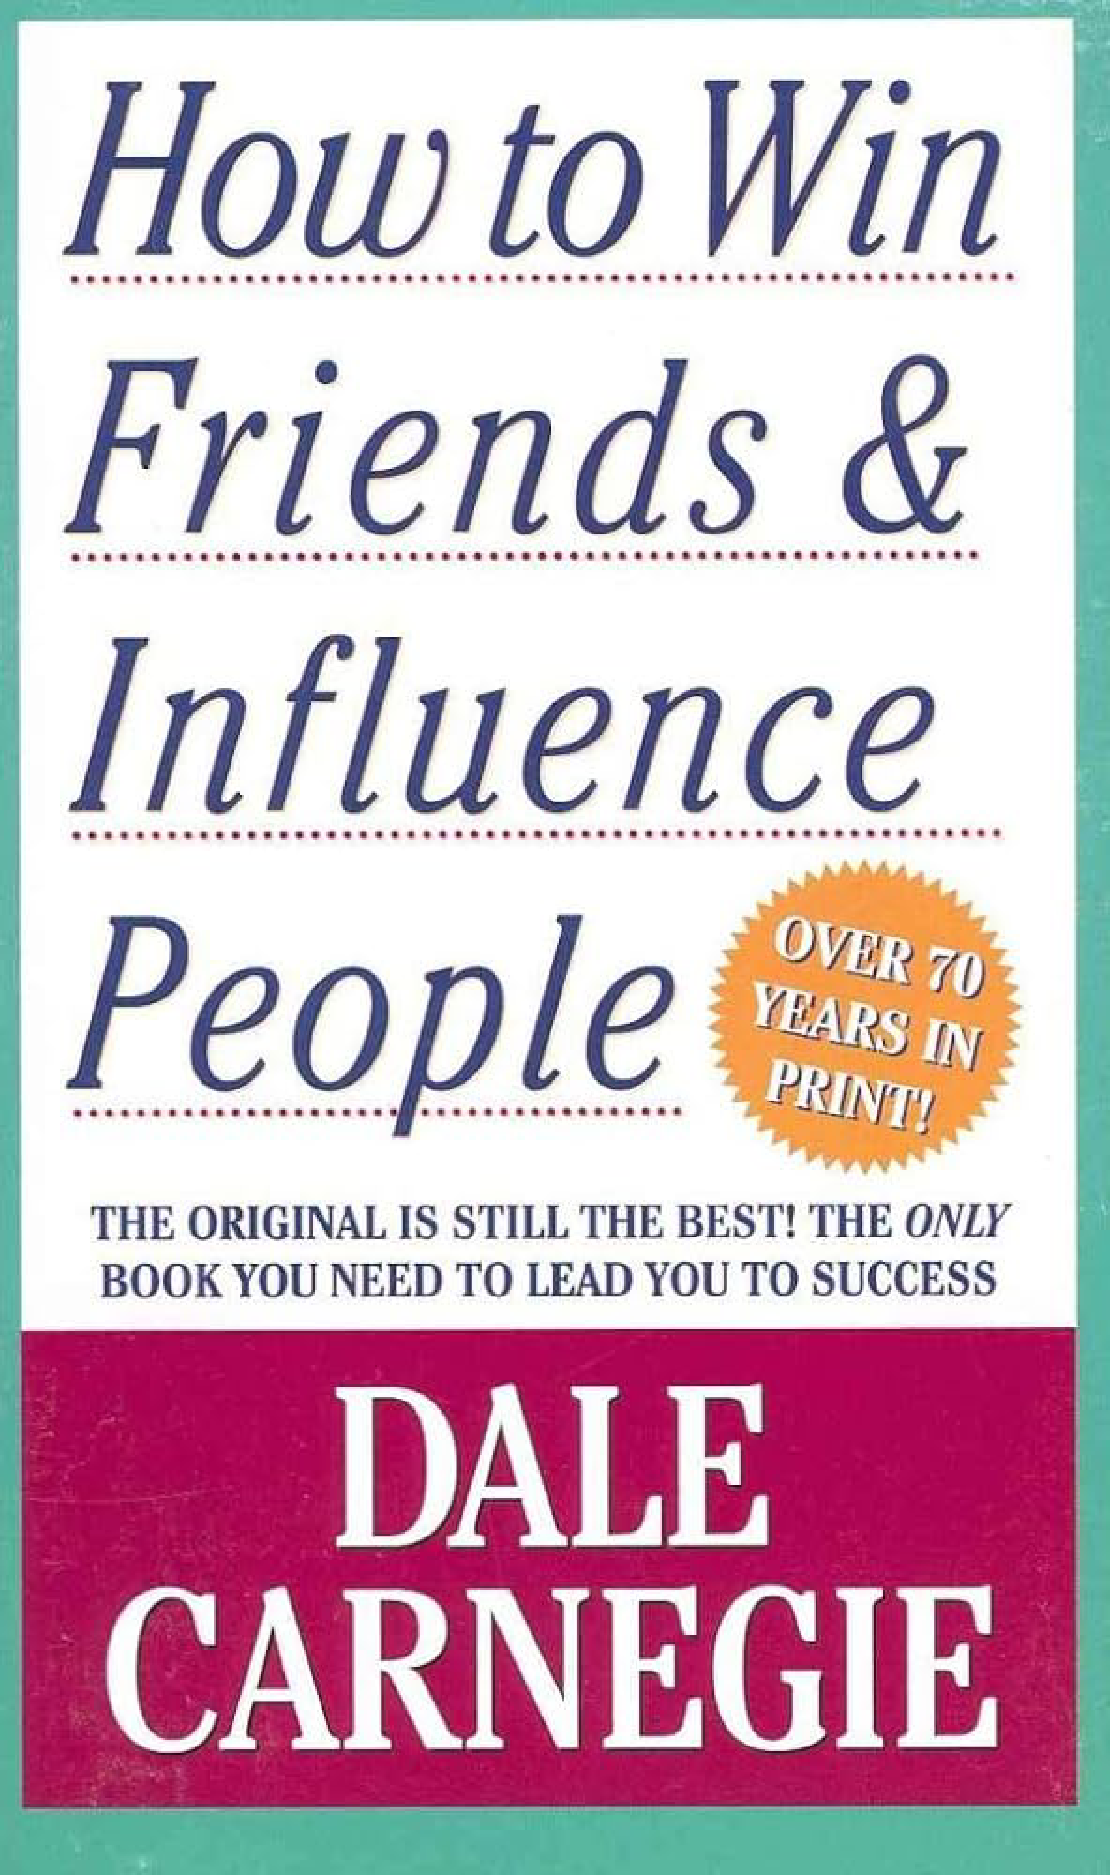 How to Influence People and Win Friends Book Summary